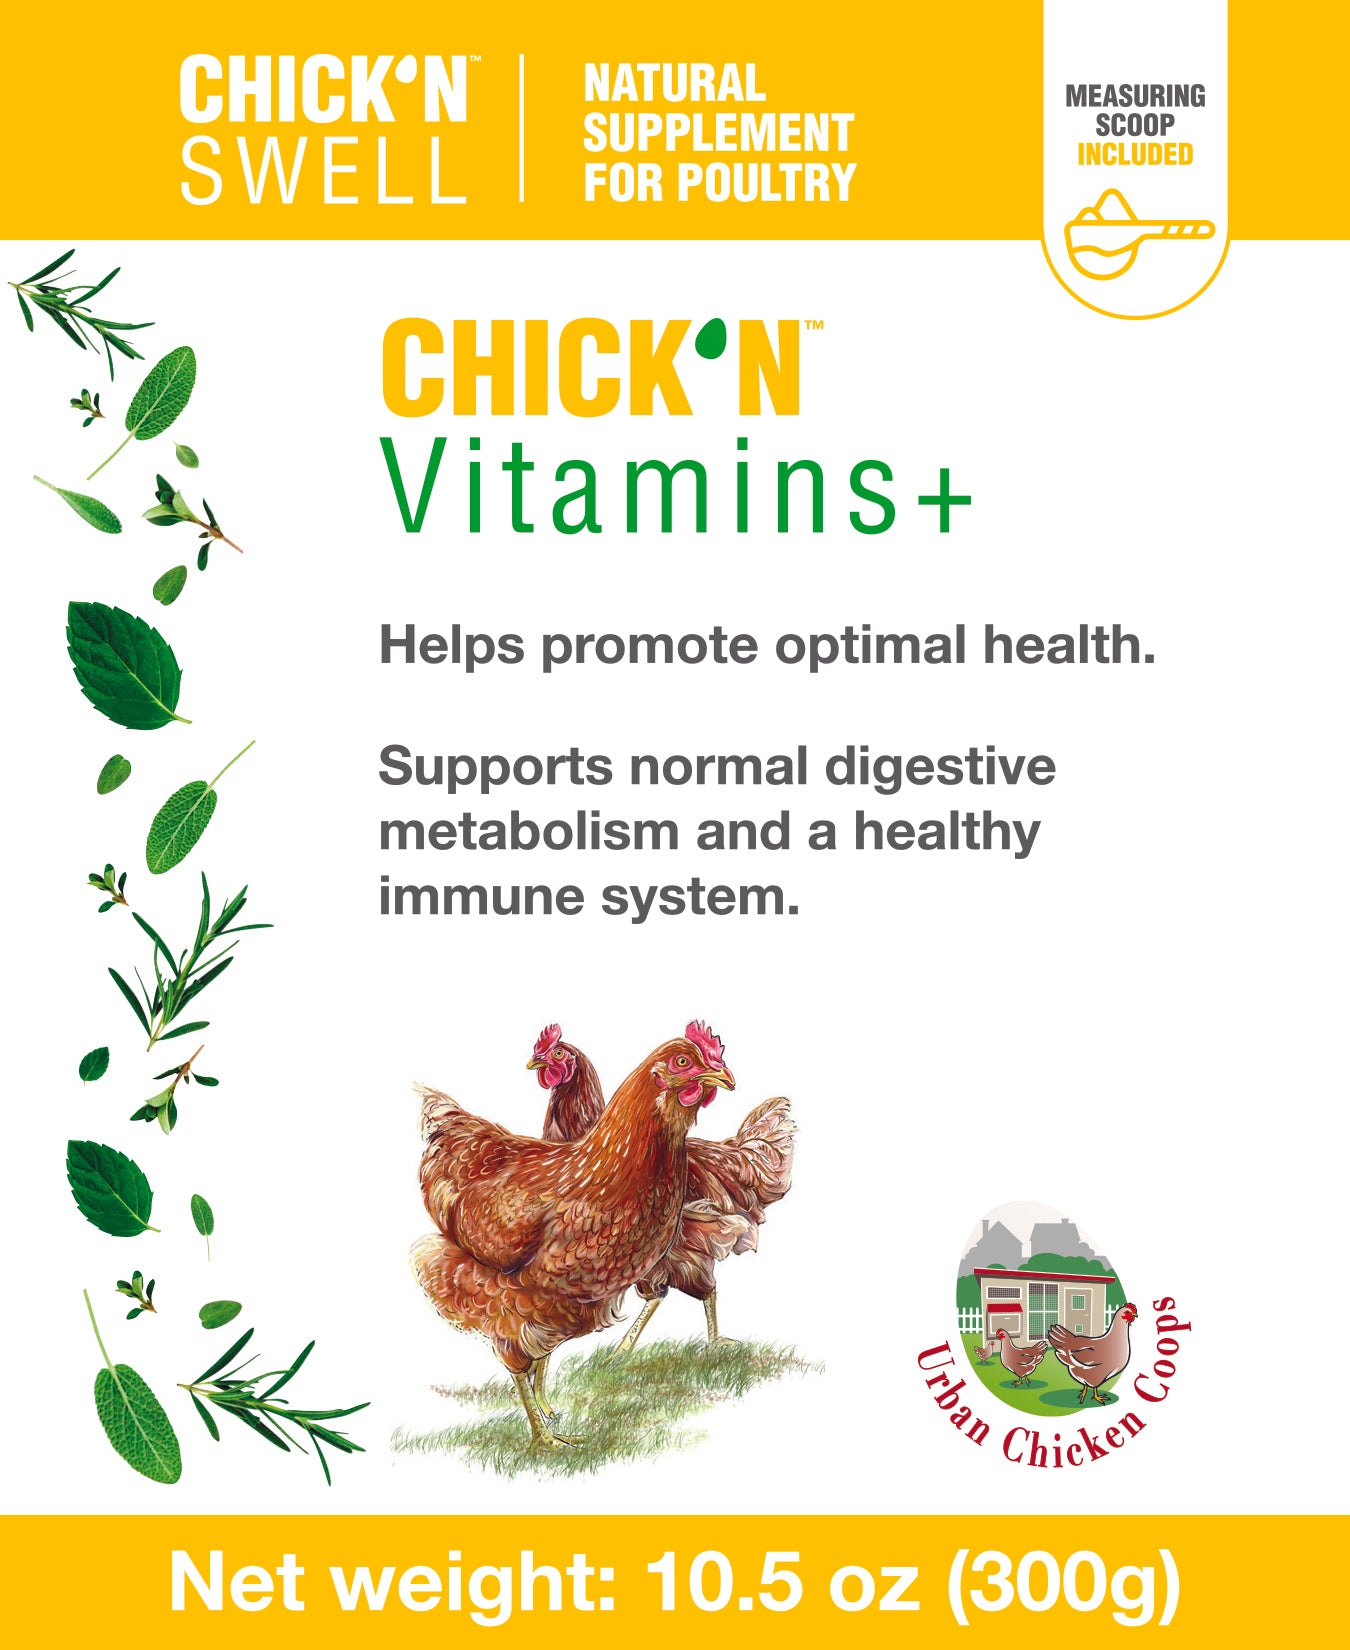 Chick’N ™ Vitamins+ Available on Amazon.com only